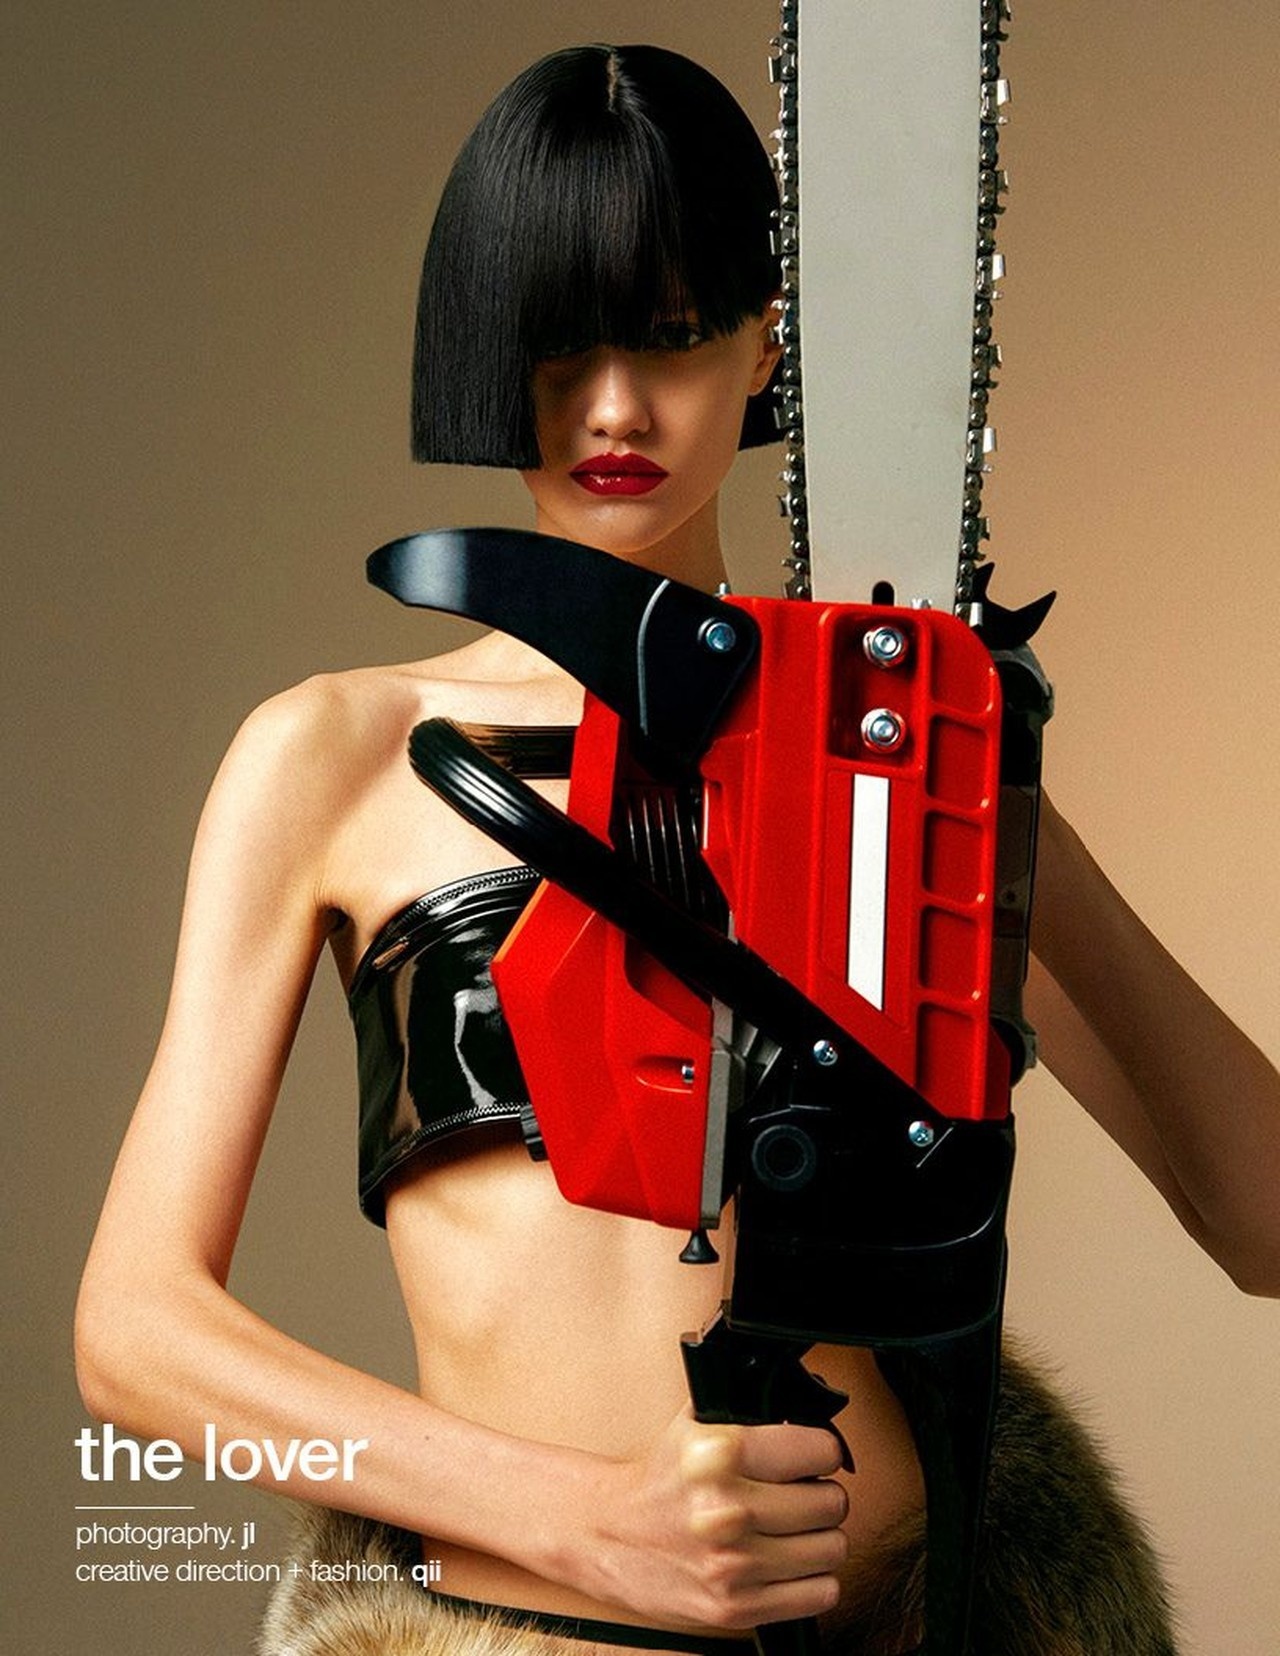 The Lover By Jl Editorial